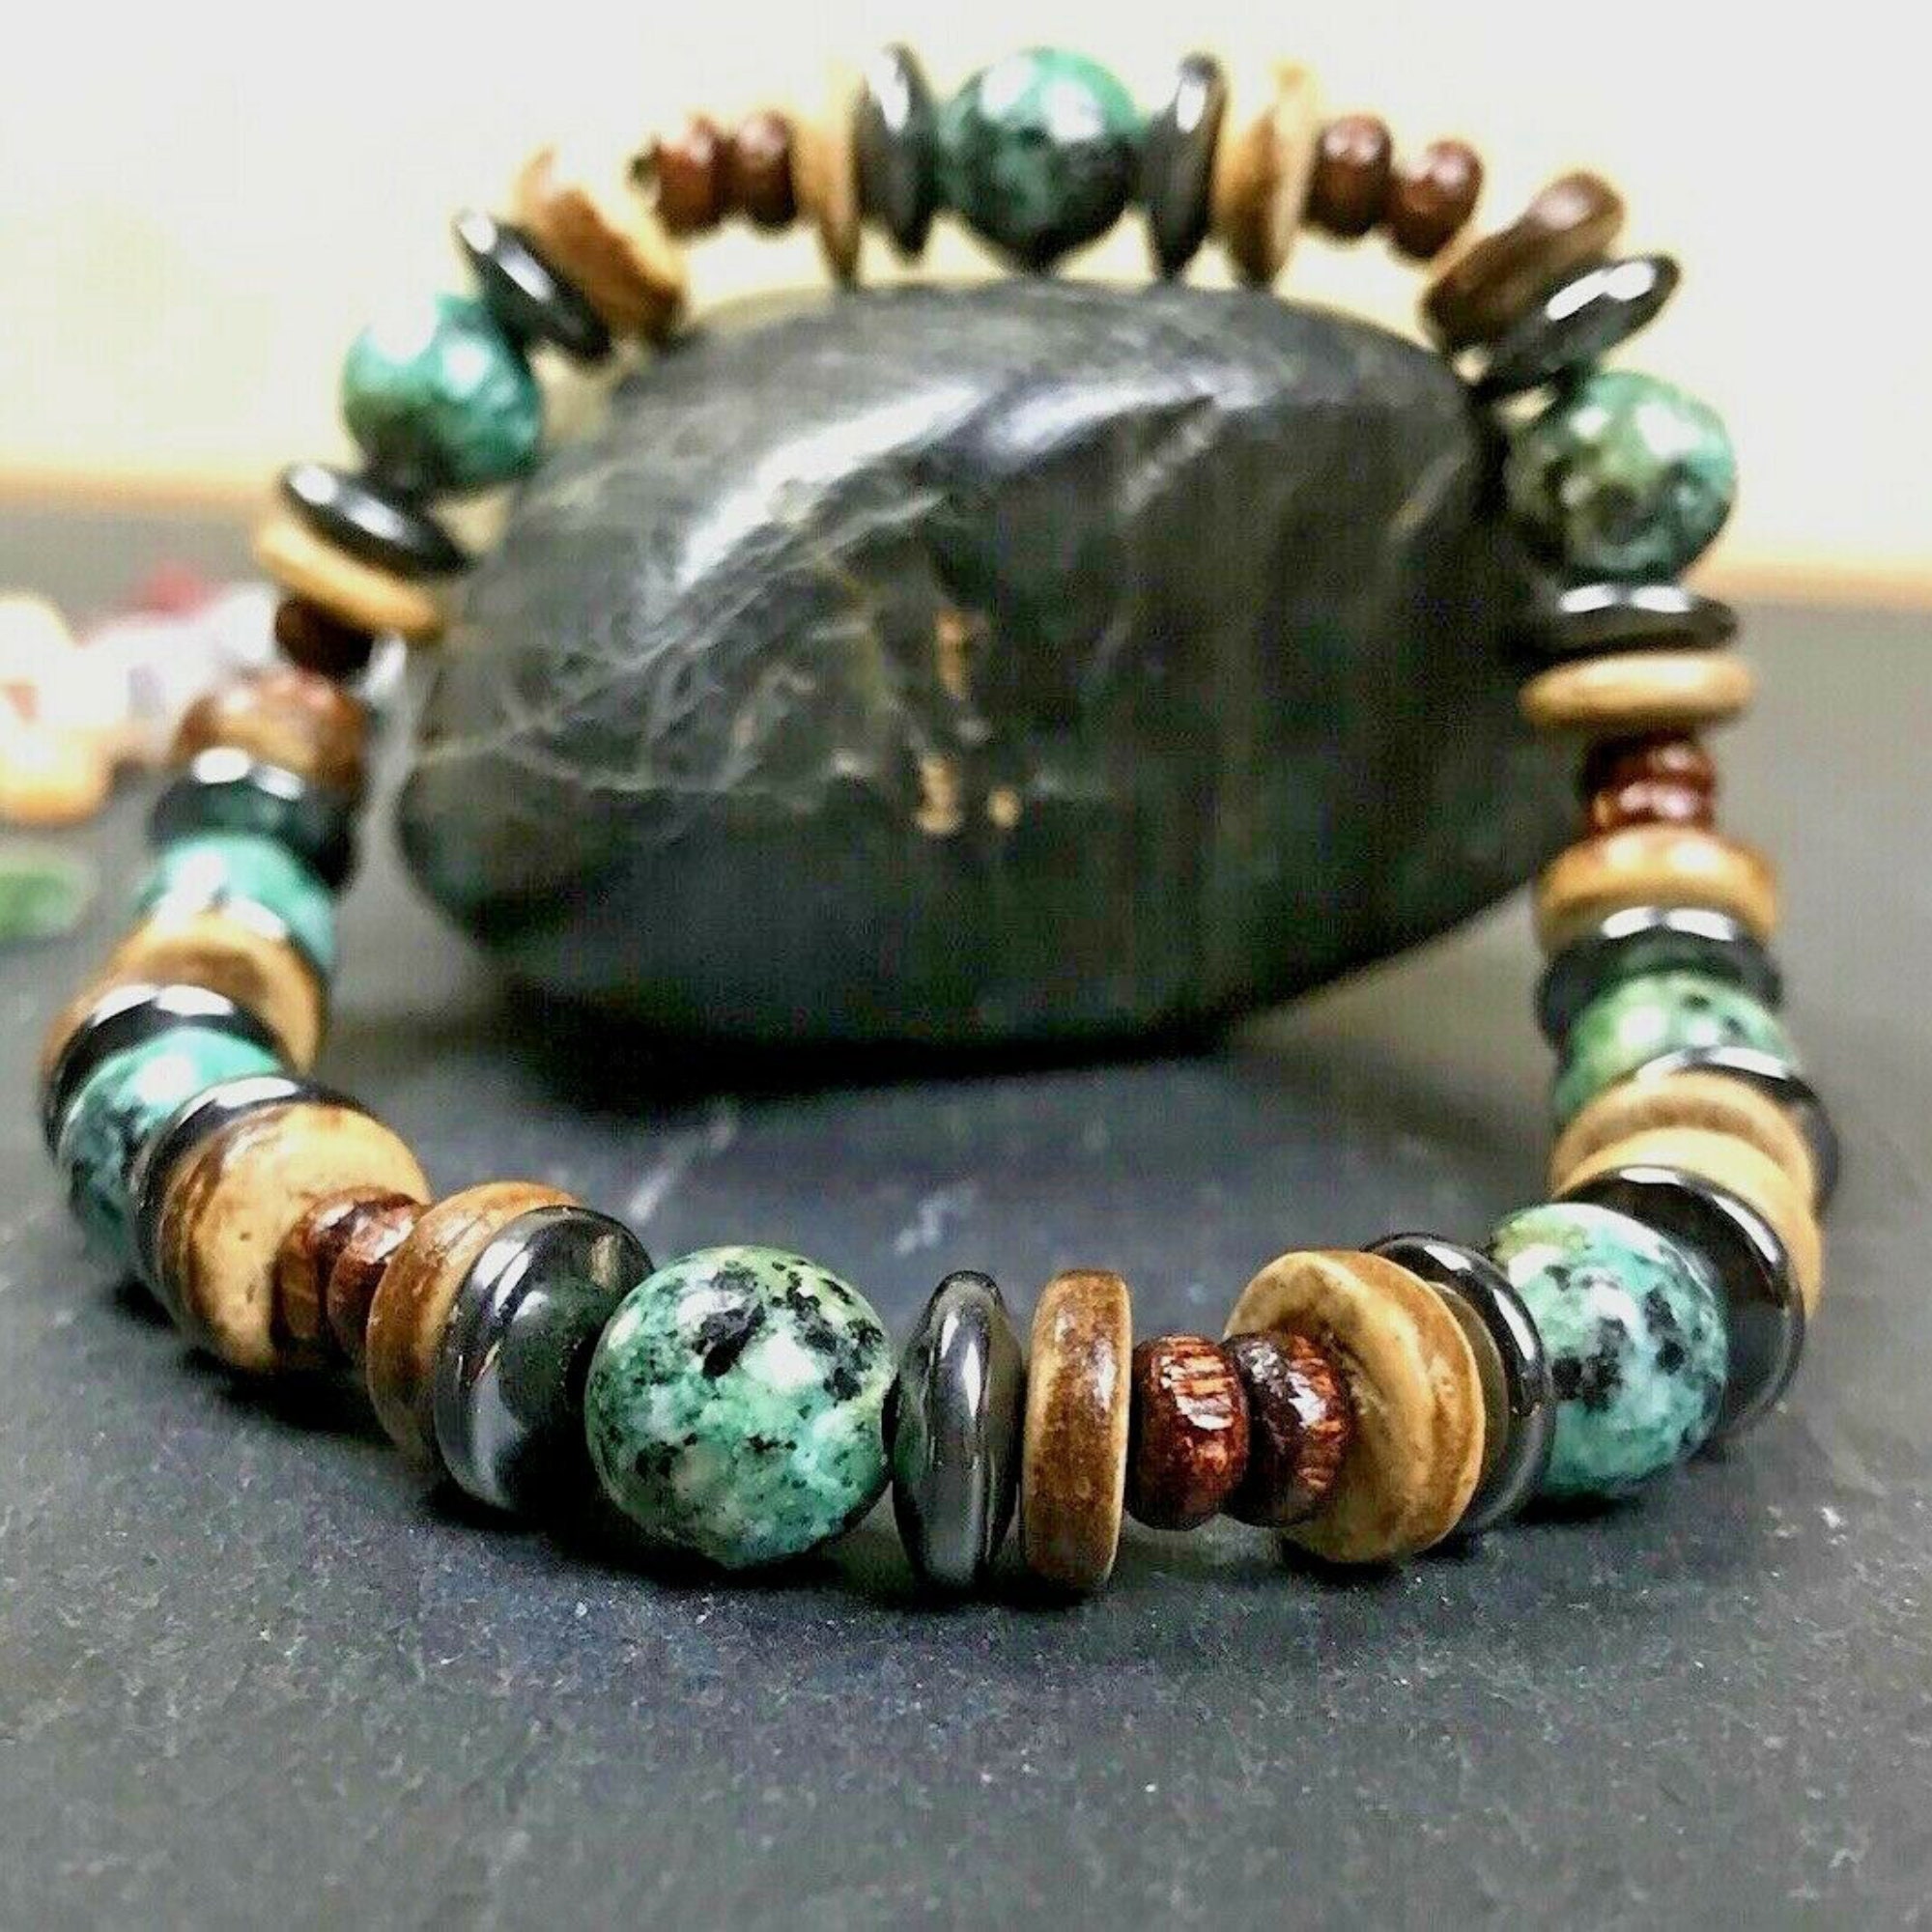 African Turquoise Bead Bracelet 8 mm Round Crystals Natural Turquoise  Bracelet  eBay